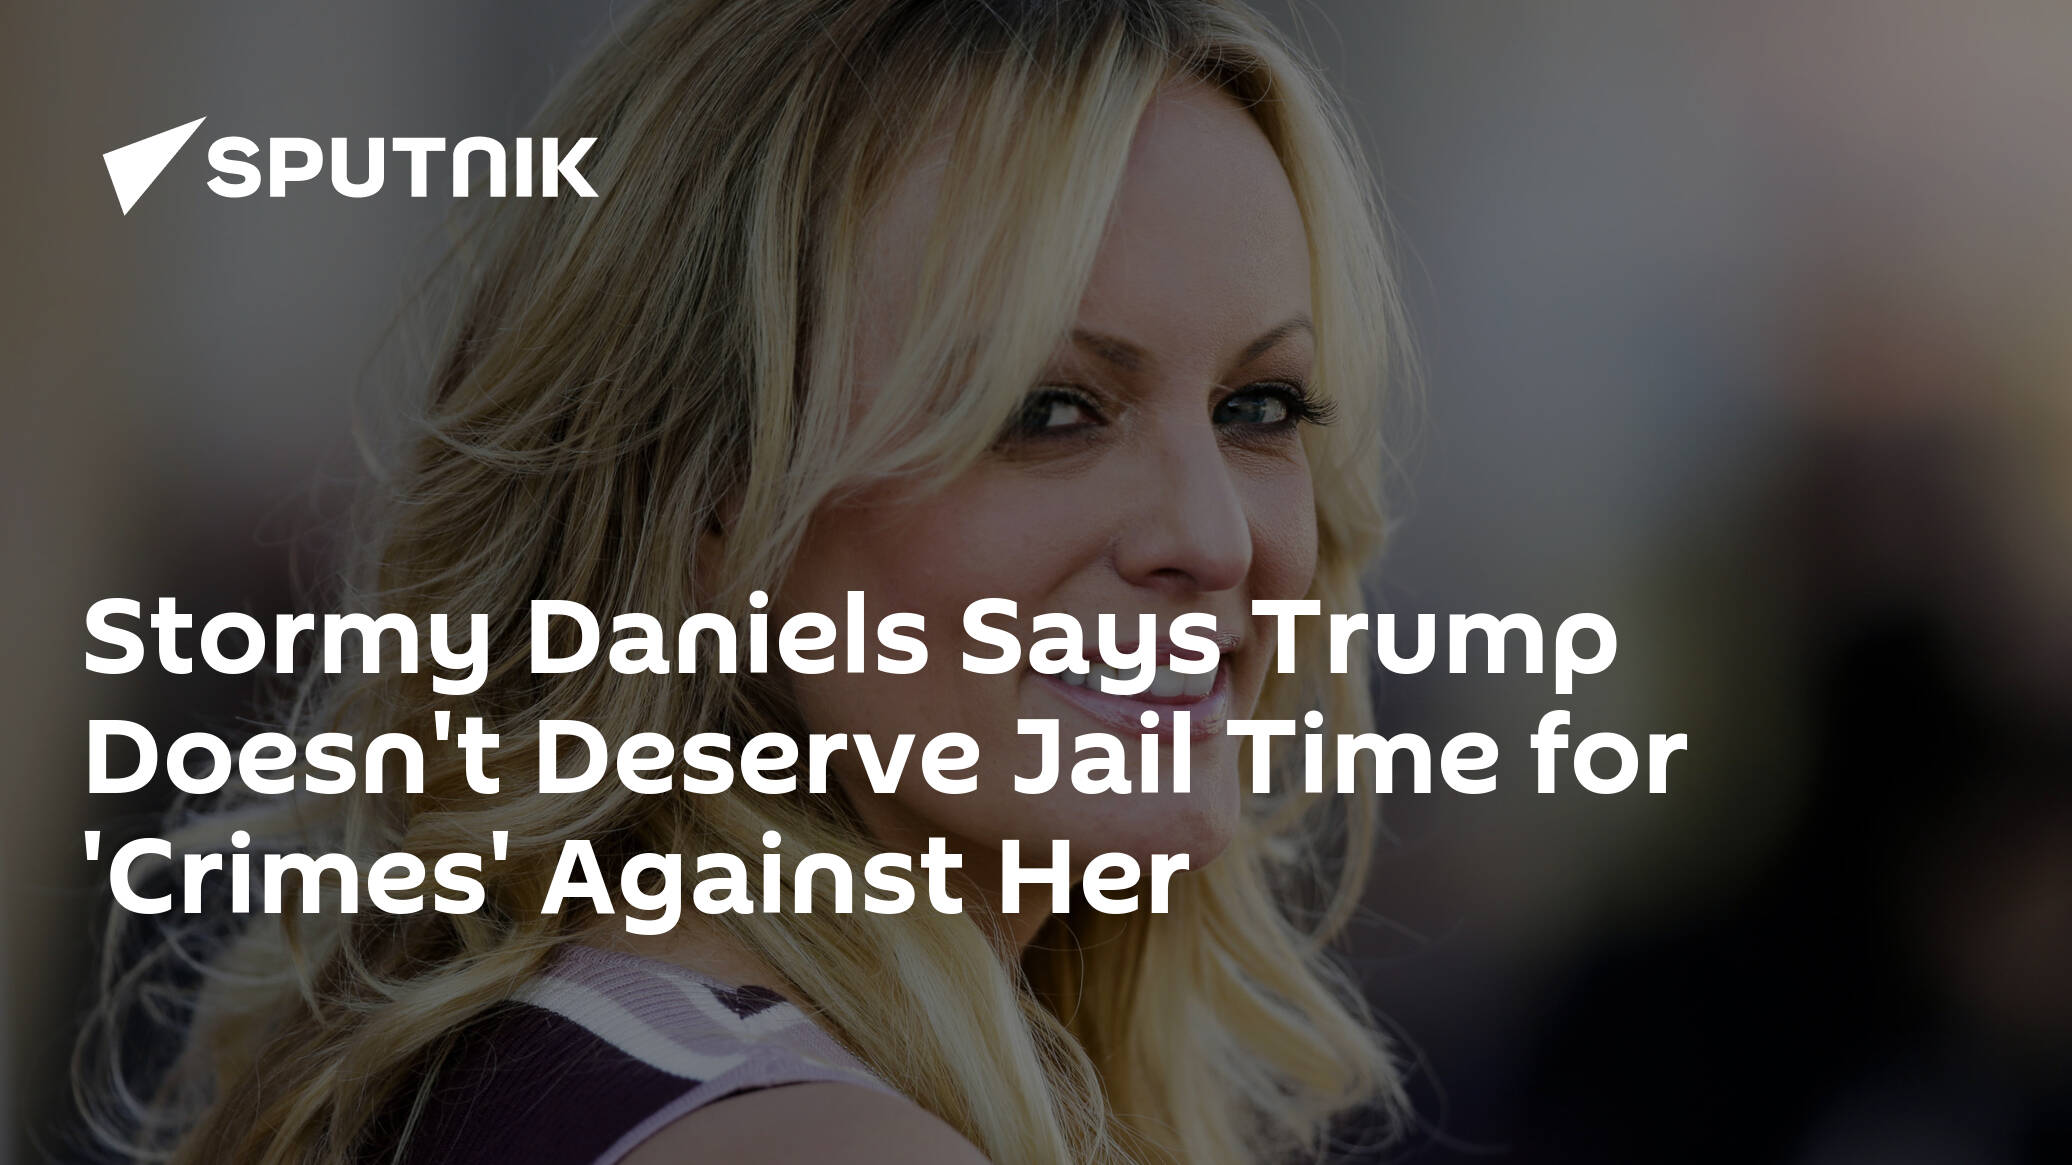 Stormy Daniels Says Trump Doesn't Deserve Jail Time for 'Crimes' Against Her